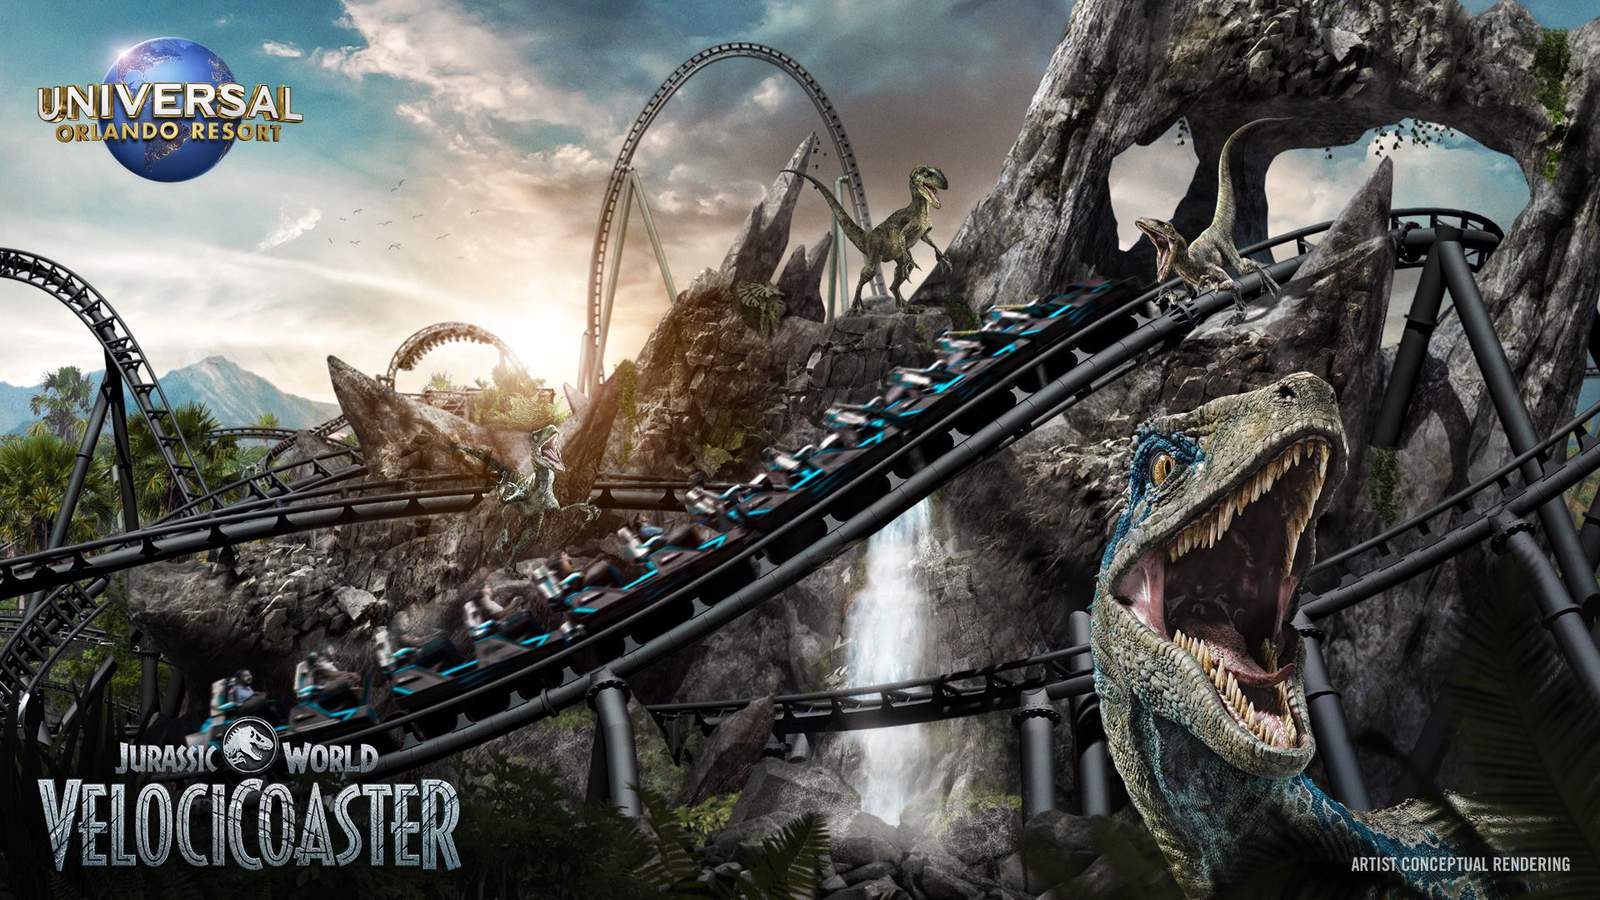 Hold onto your butts: Universal Orlando shares details about Jurassic World VelociCoaster